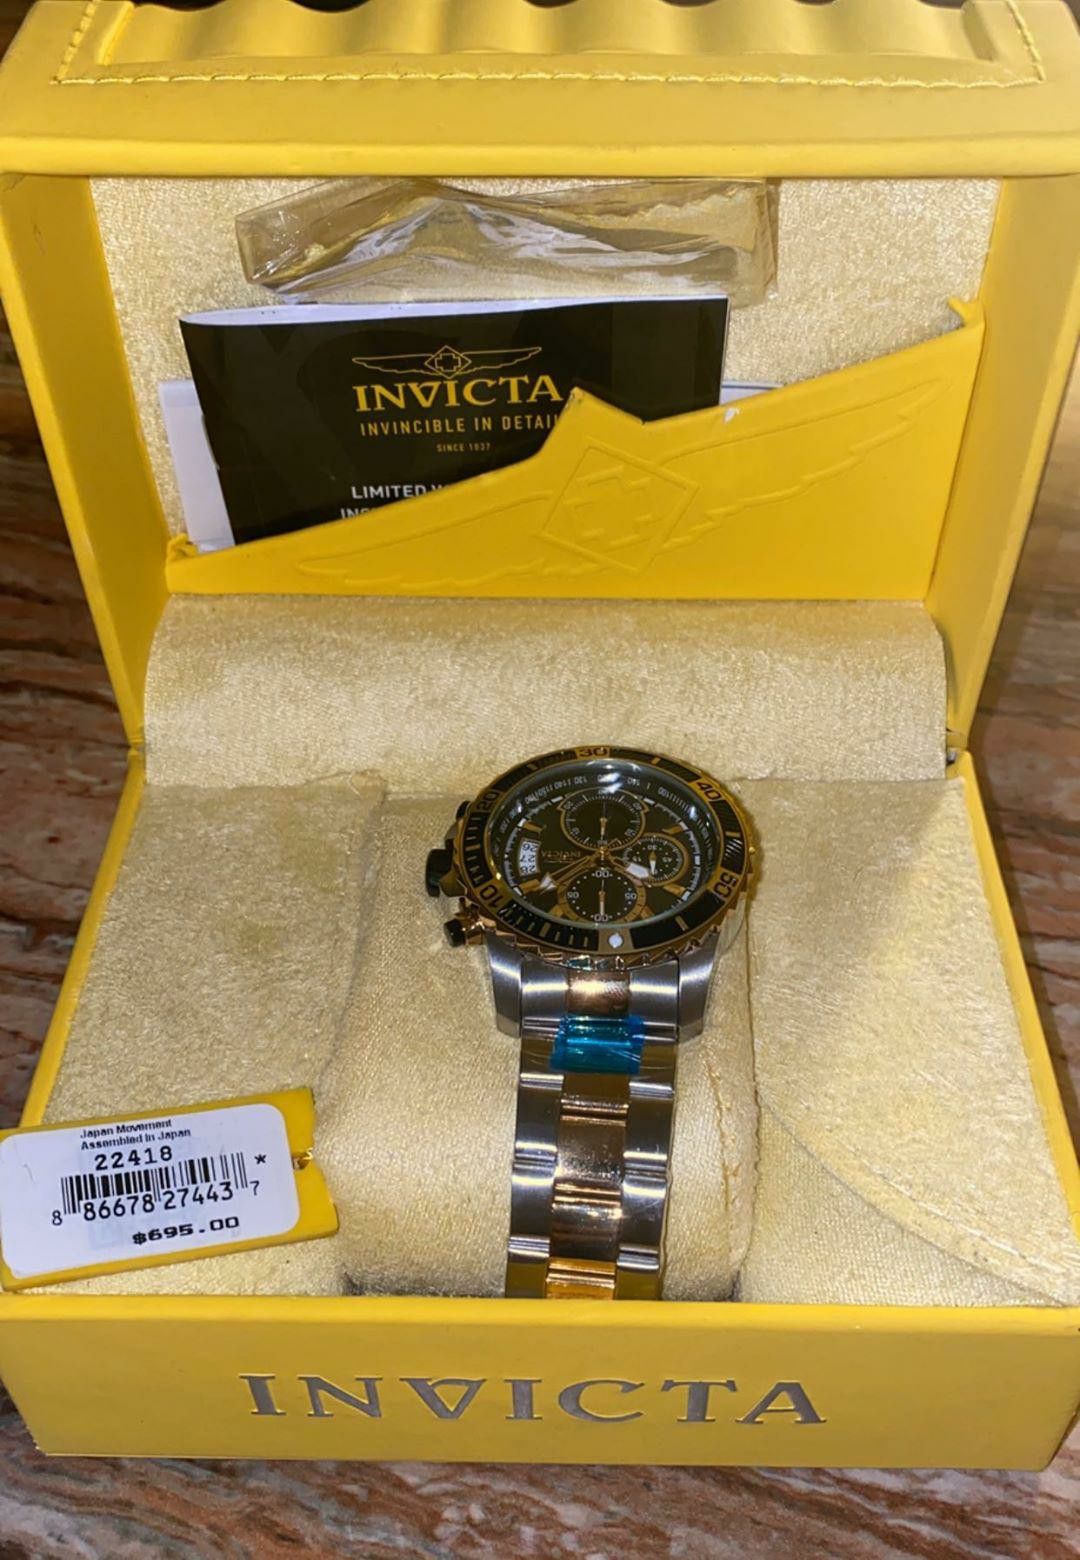 Invicta mens watch asking For $200 price tag 700$